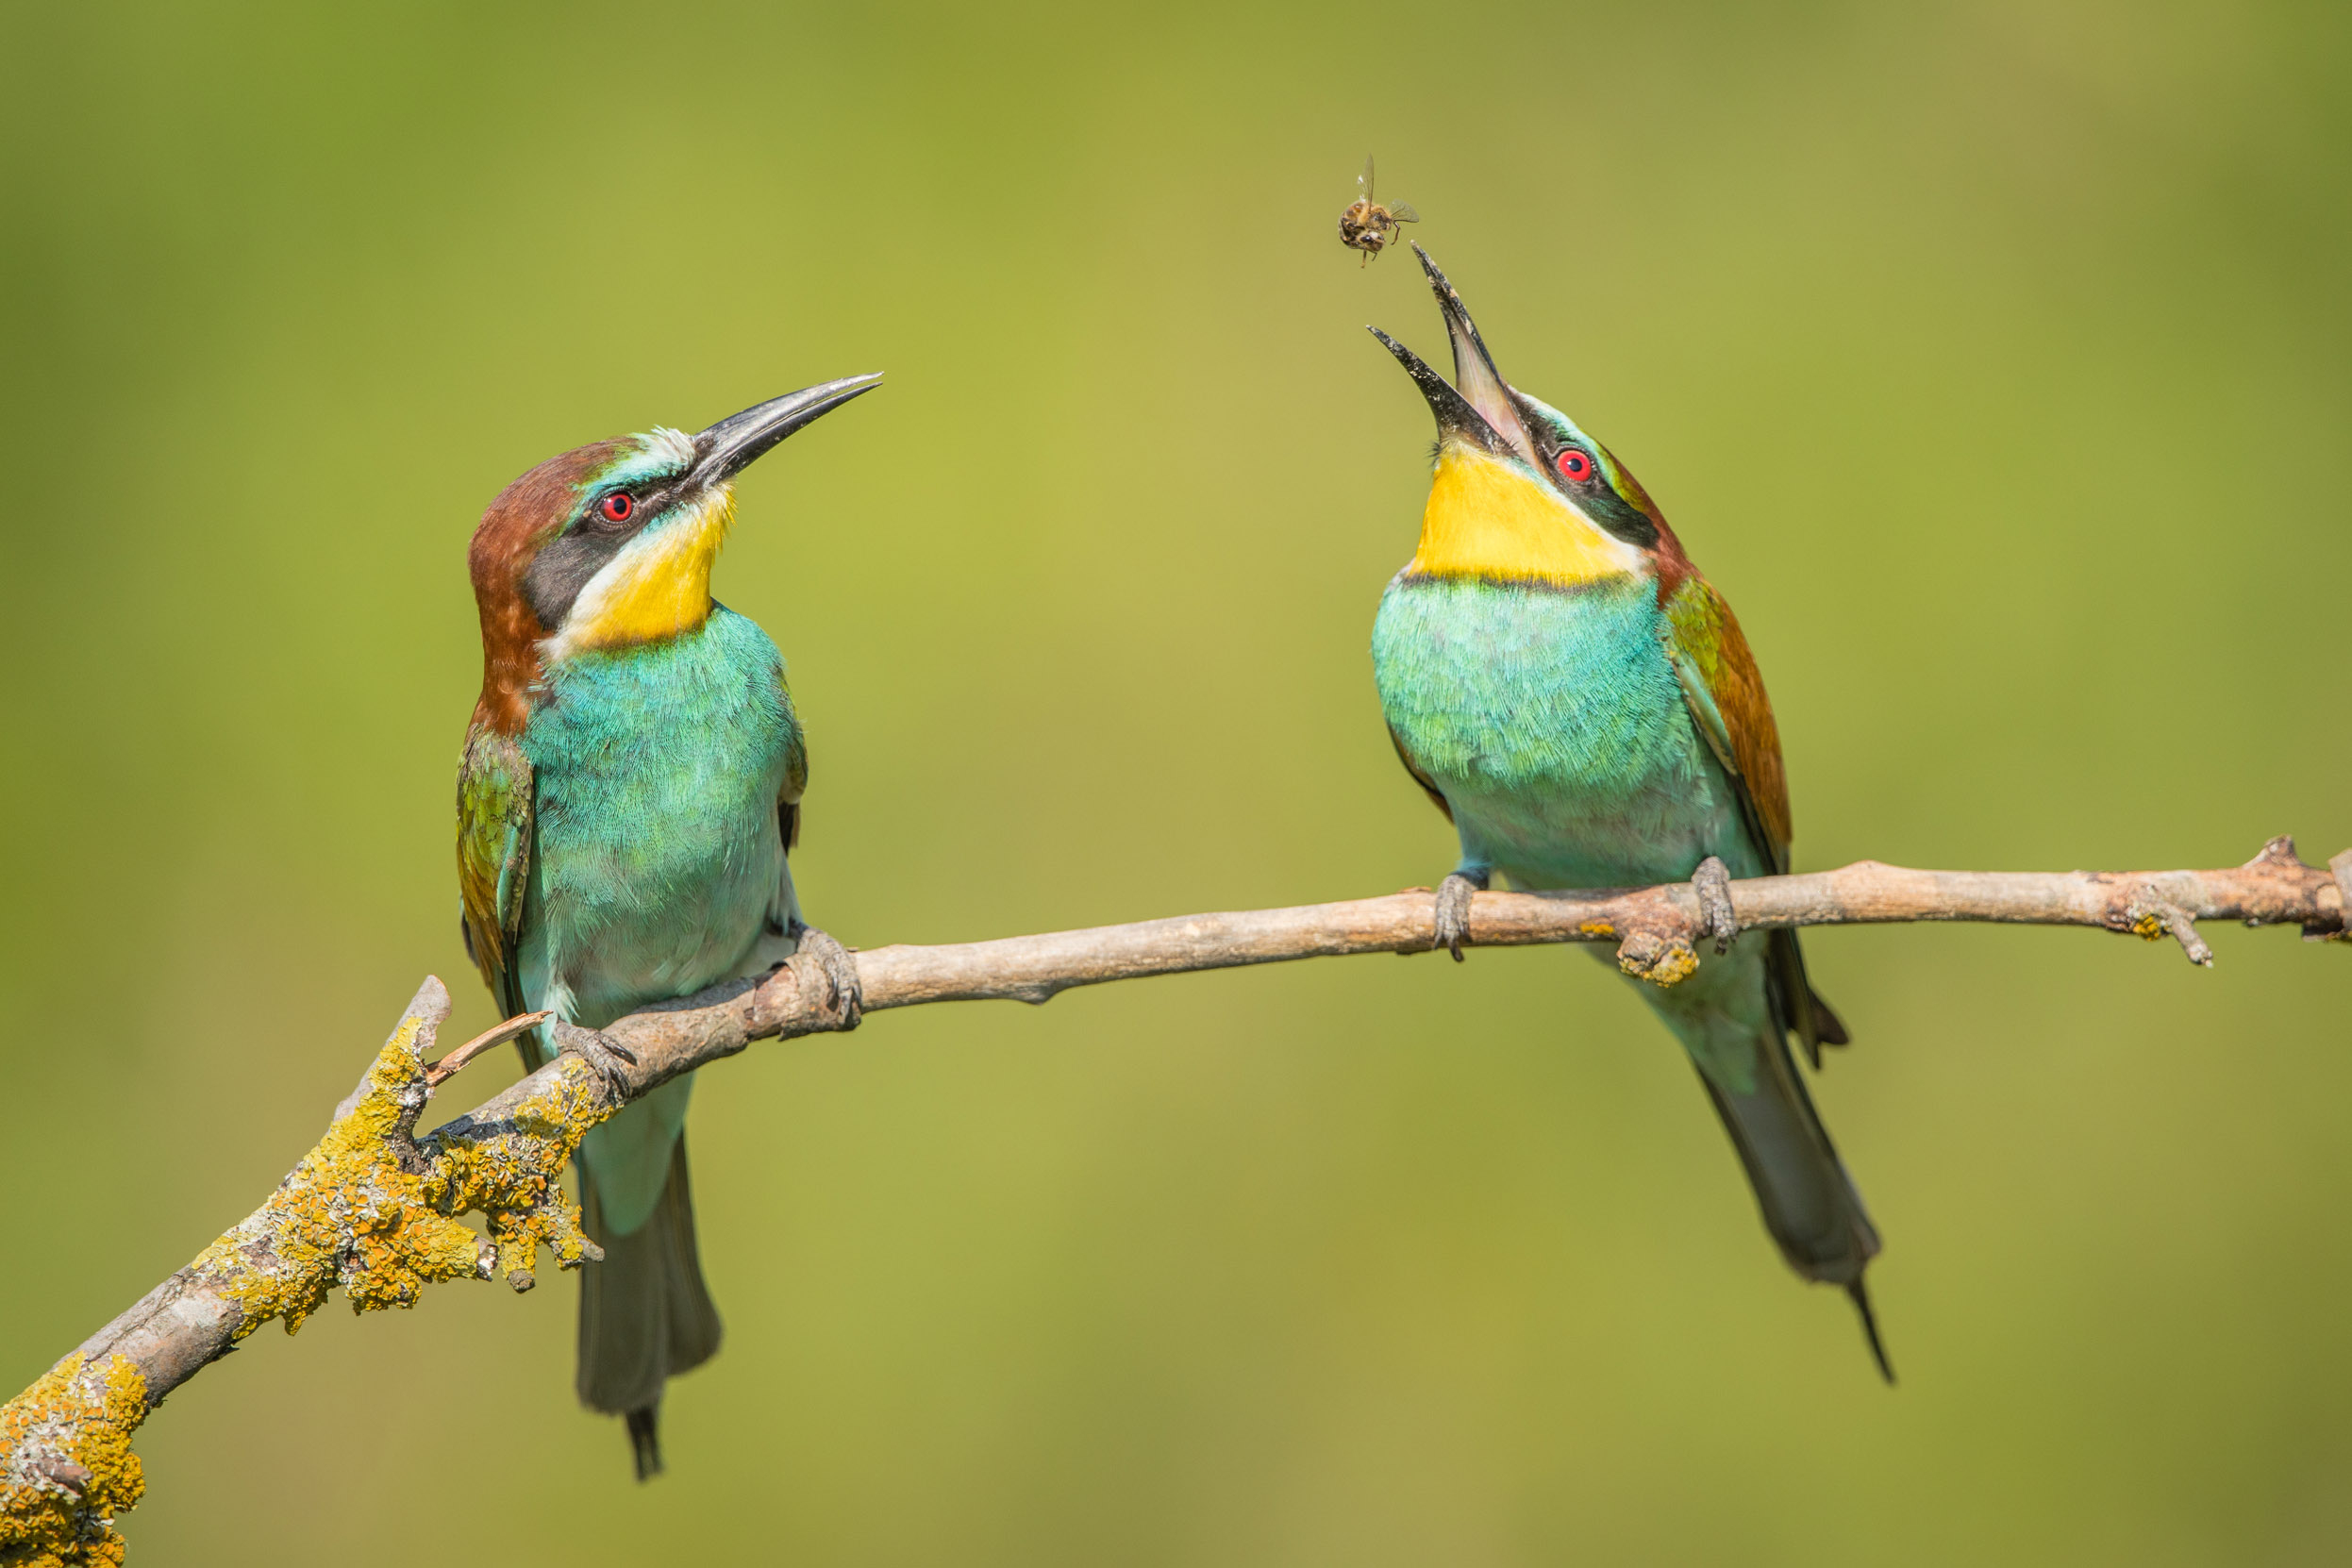 A pair of Bee-Eaters perched on a branch playing with a bee.